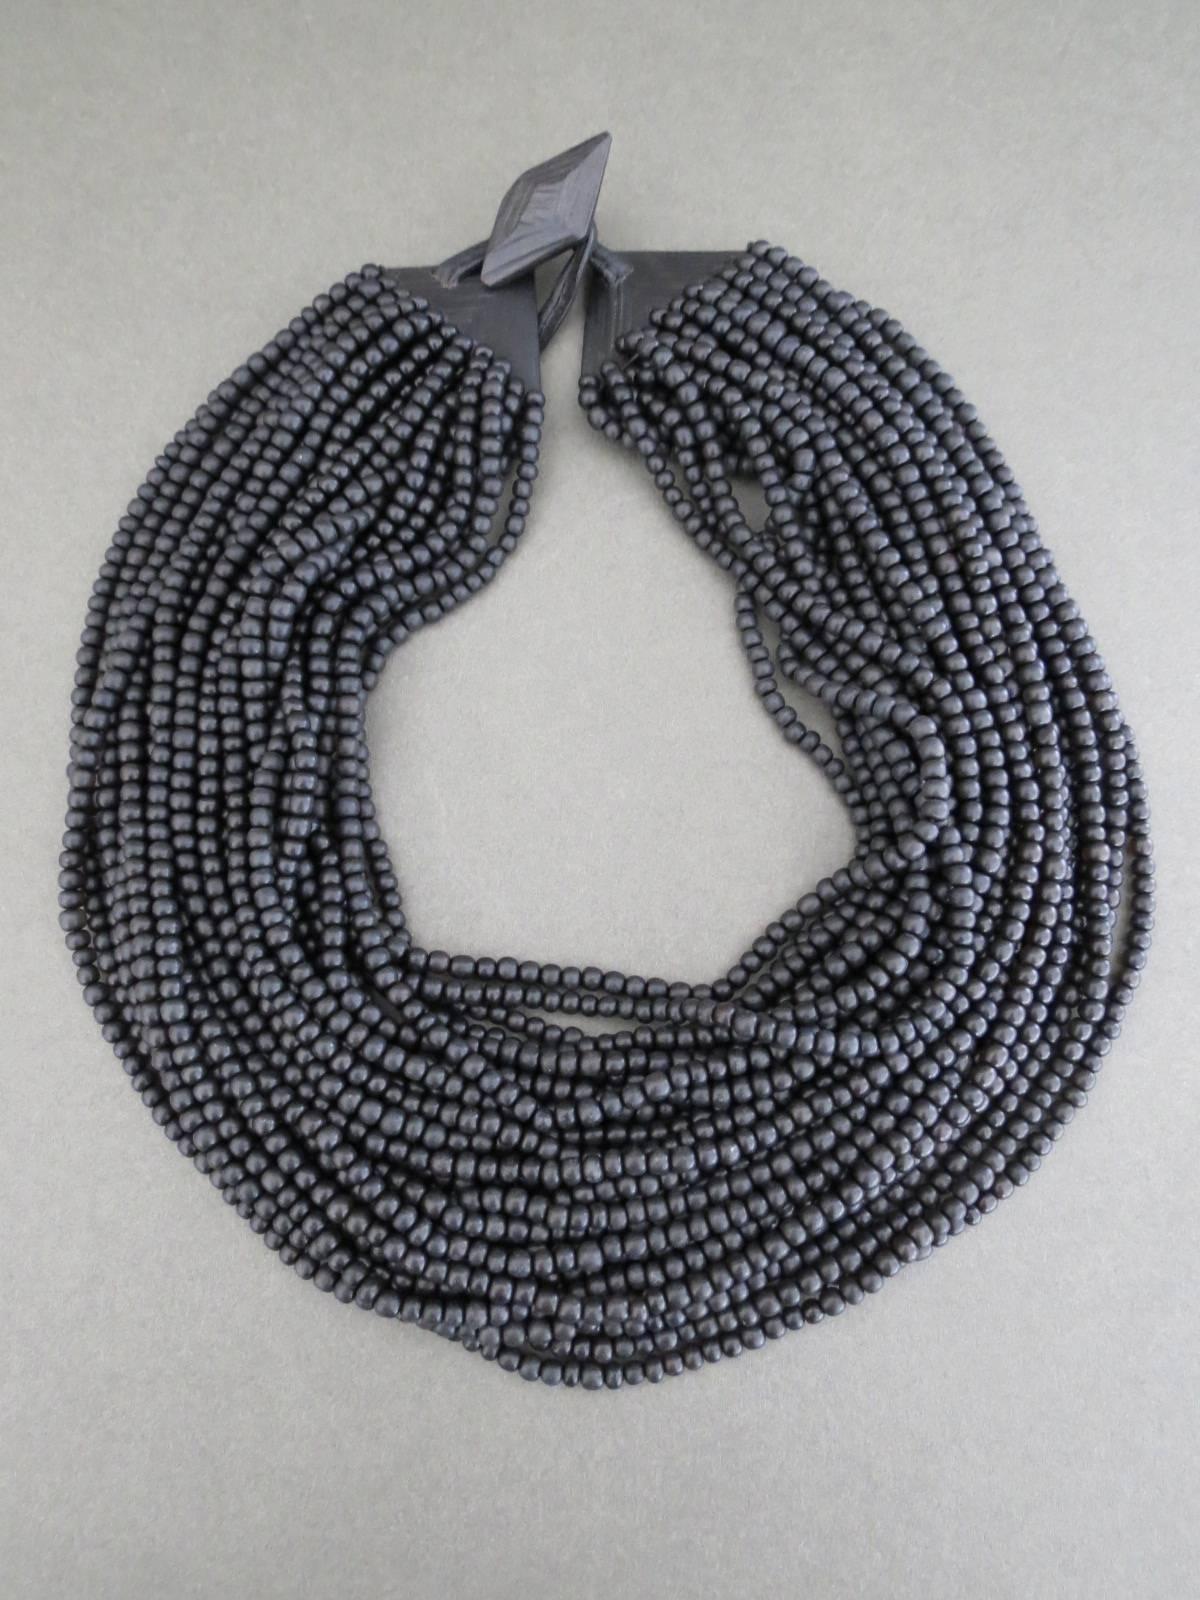 This is lovely Danish Monies necklace designed by Gerda Lynggaard . The necklace is labelled.
Item Specifics
Length: 48cm (approx 18.50